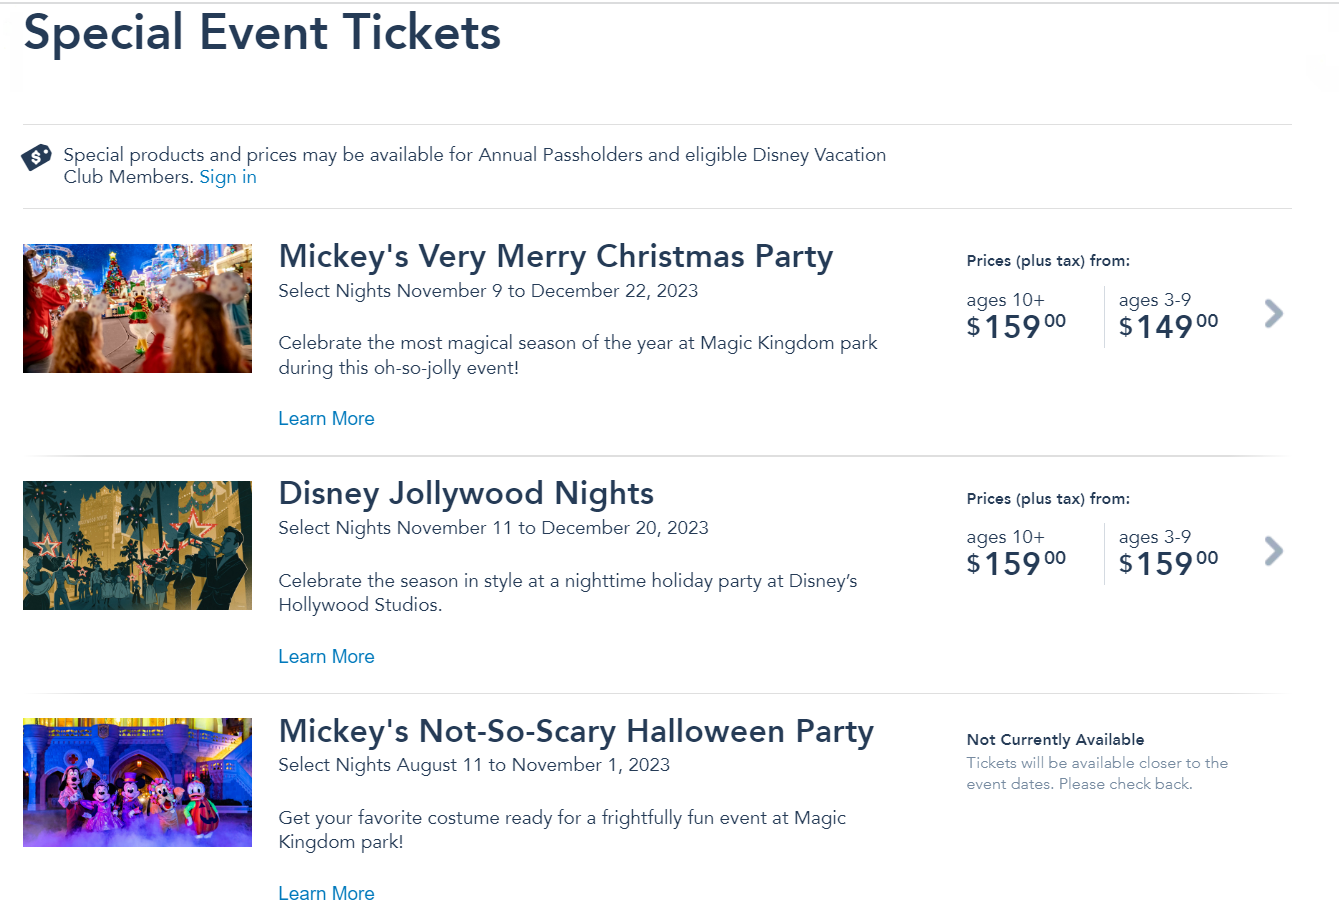 MNSSHP sold out